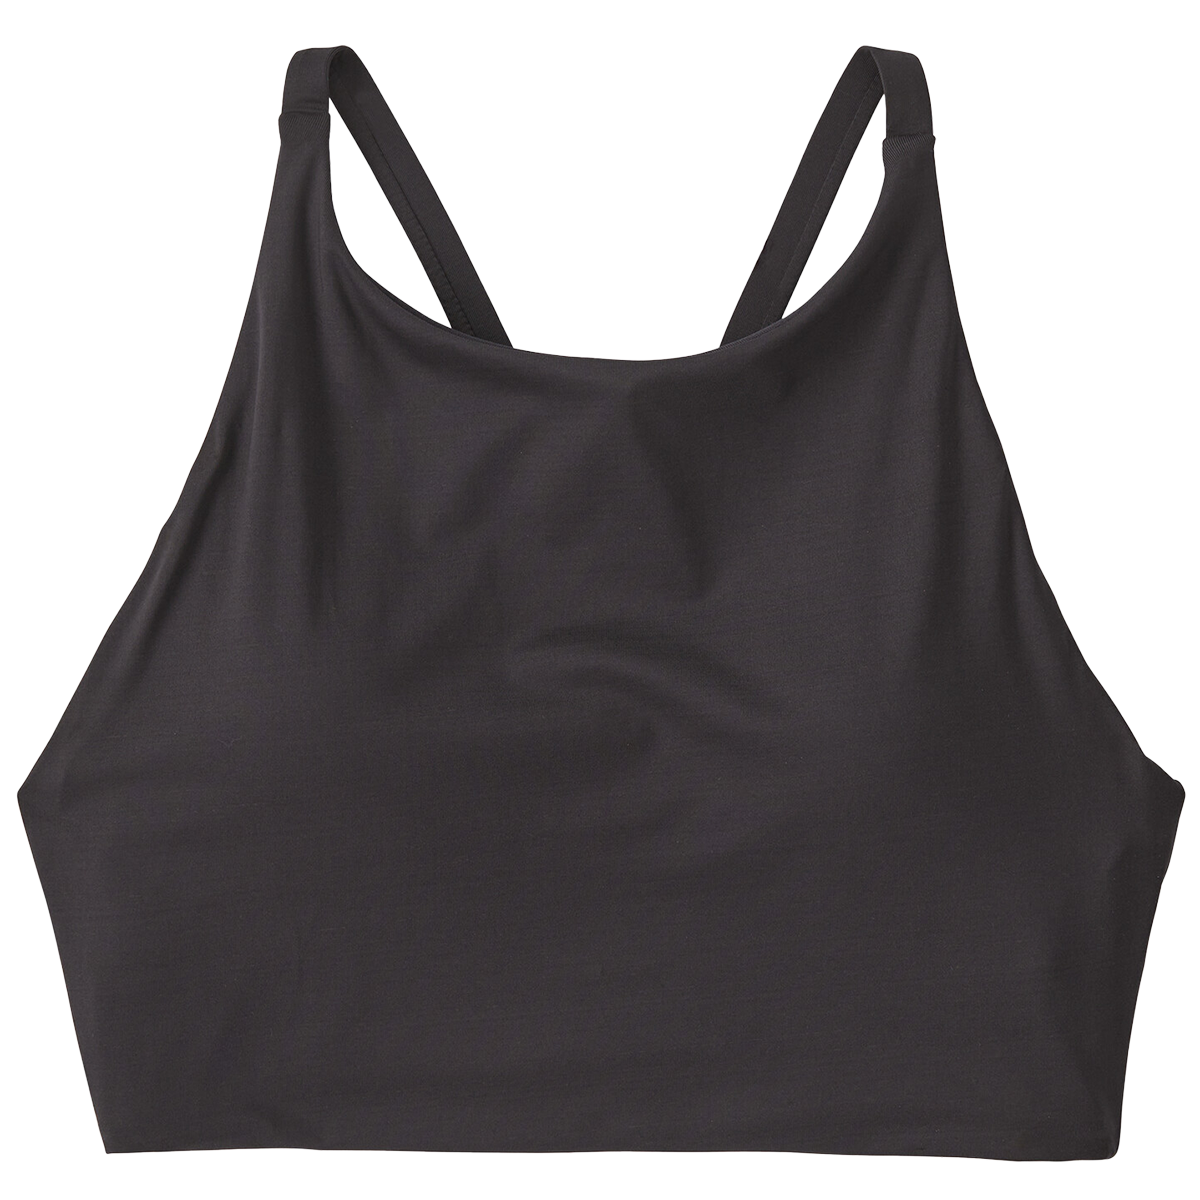 The North Face, Tops, The North Face Tank Top No Slip Shelf Bra Size M